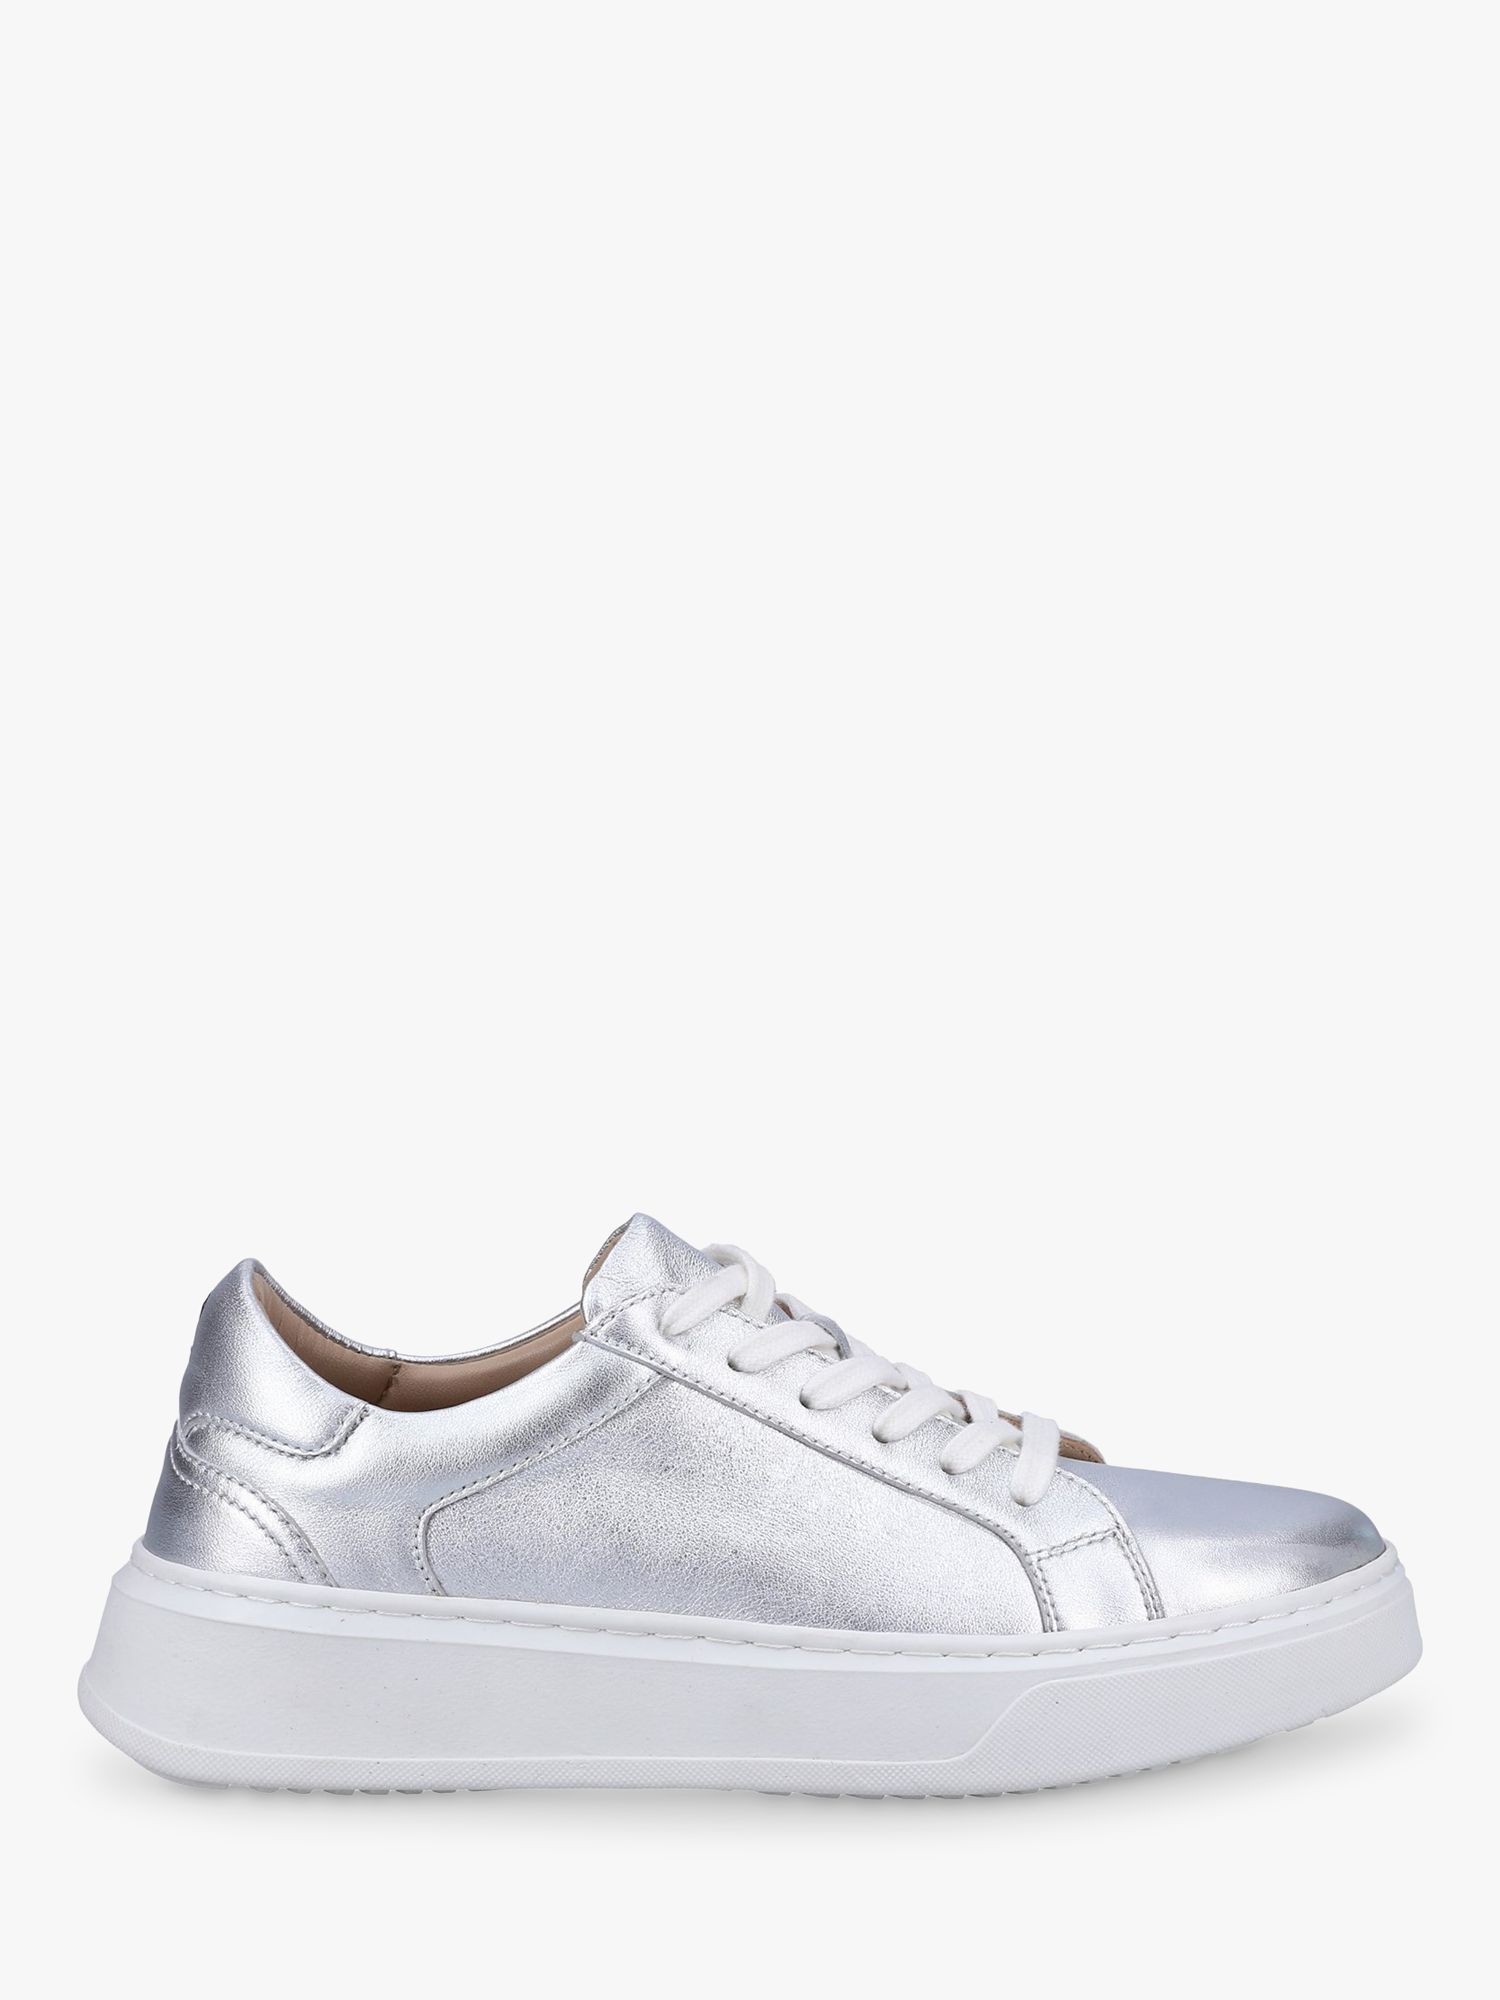 Women's silver Trainers